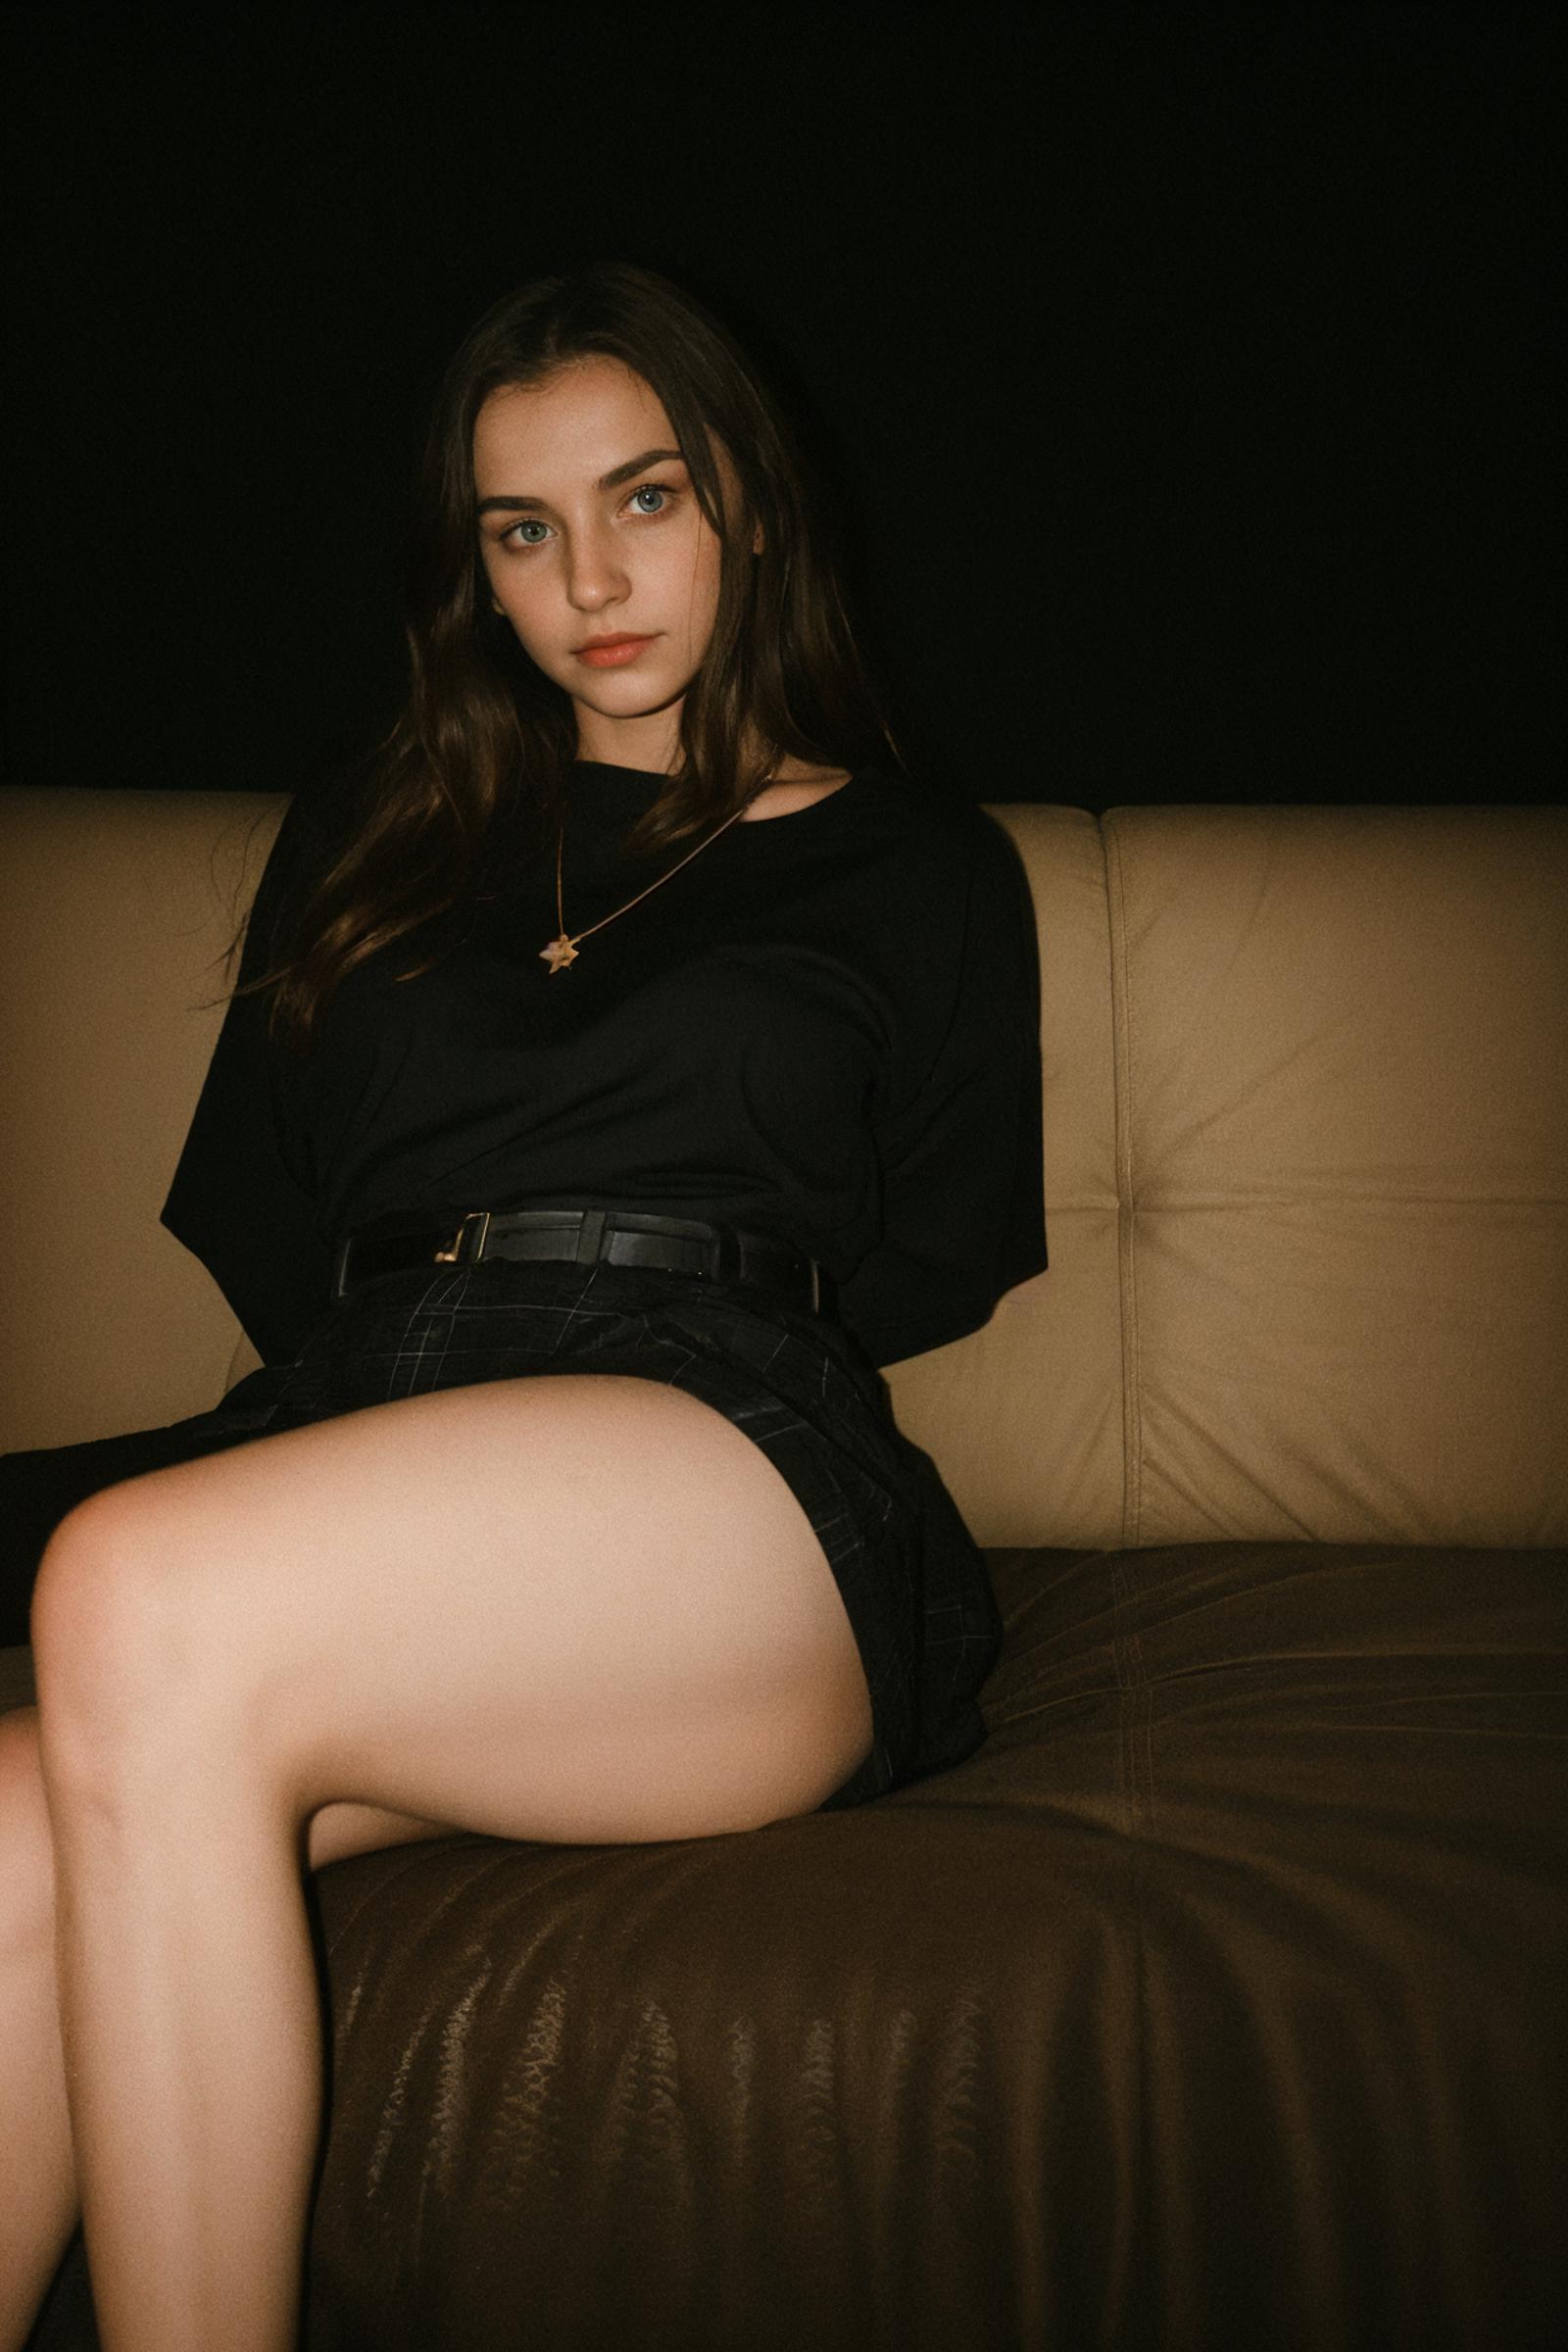 A woman wearing a black shirt and black shorts sitting on a couch.